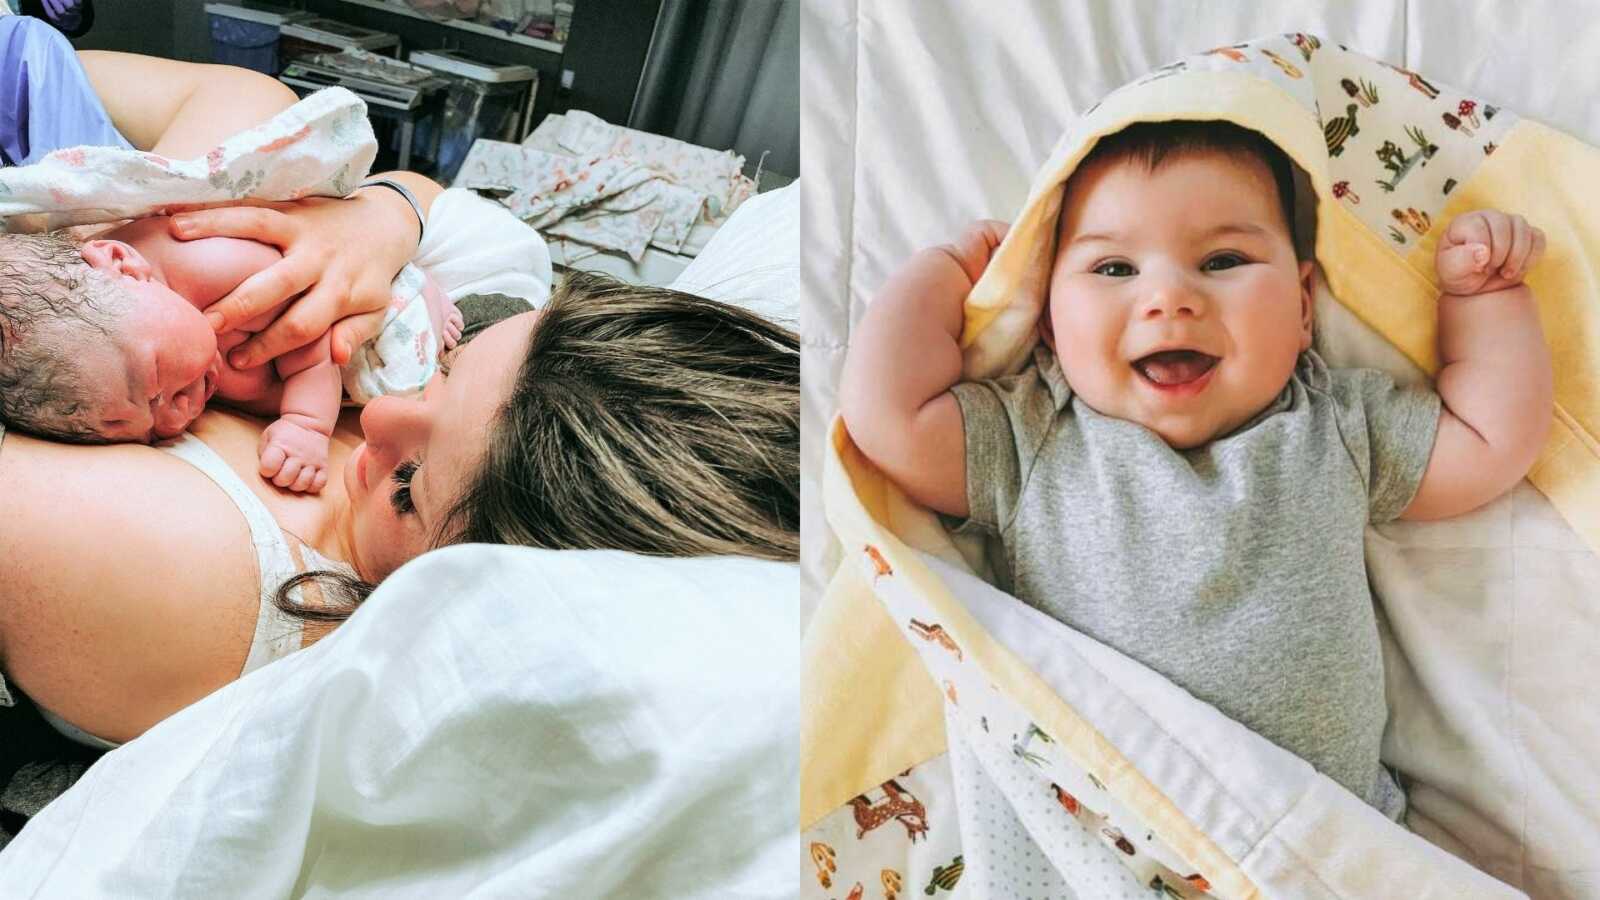 Mom shares photos from son's journey with microcephaly